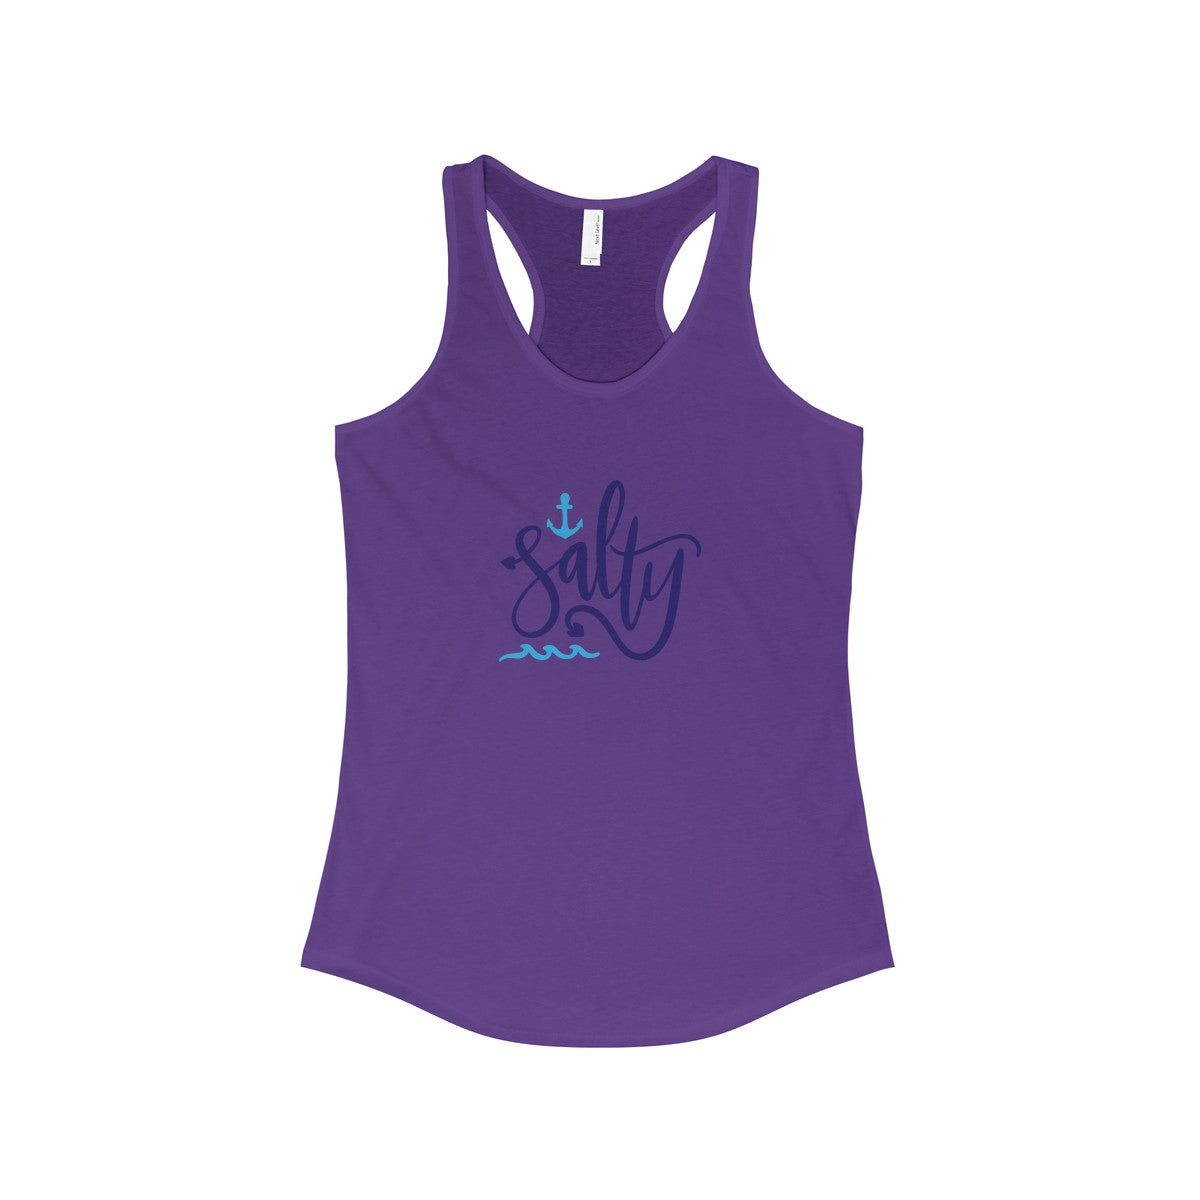 Salty Women's The Ideal Racerback Slim Fit Tank - Inspired By Savy